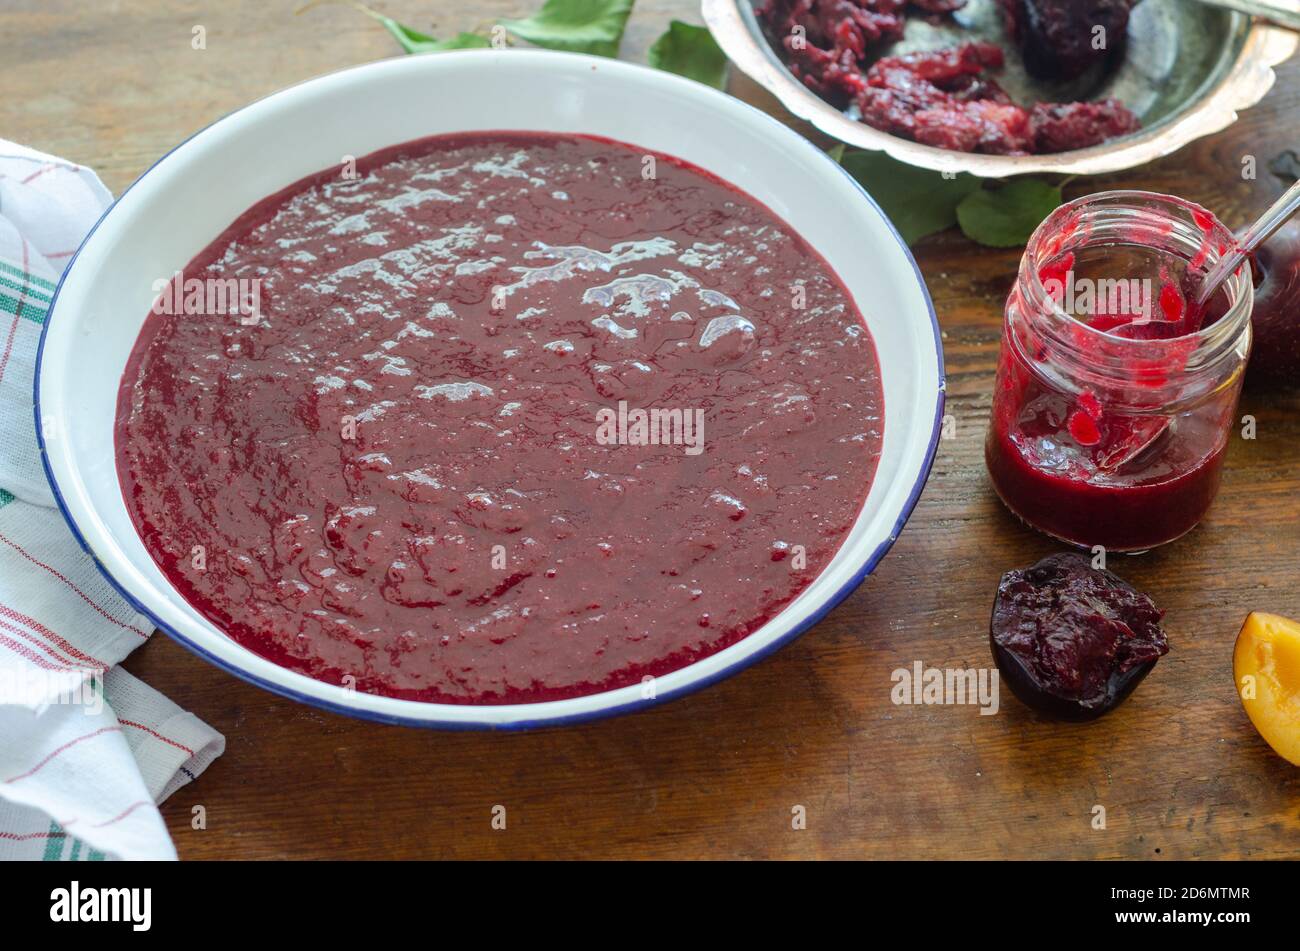 Red plum marmalade on the table. Stock Photo